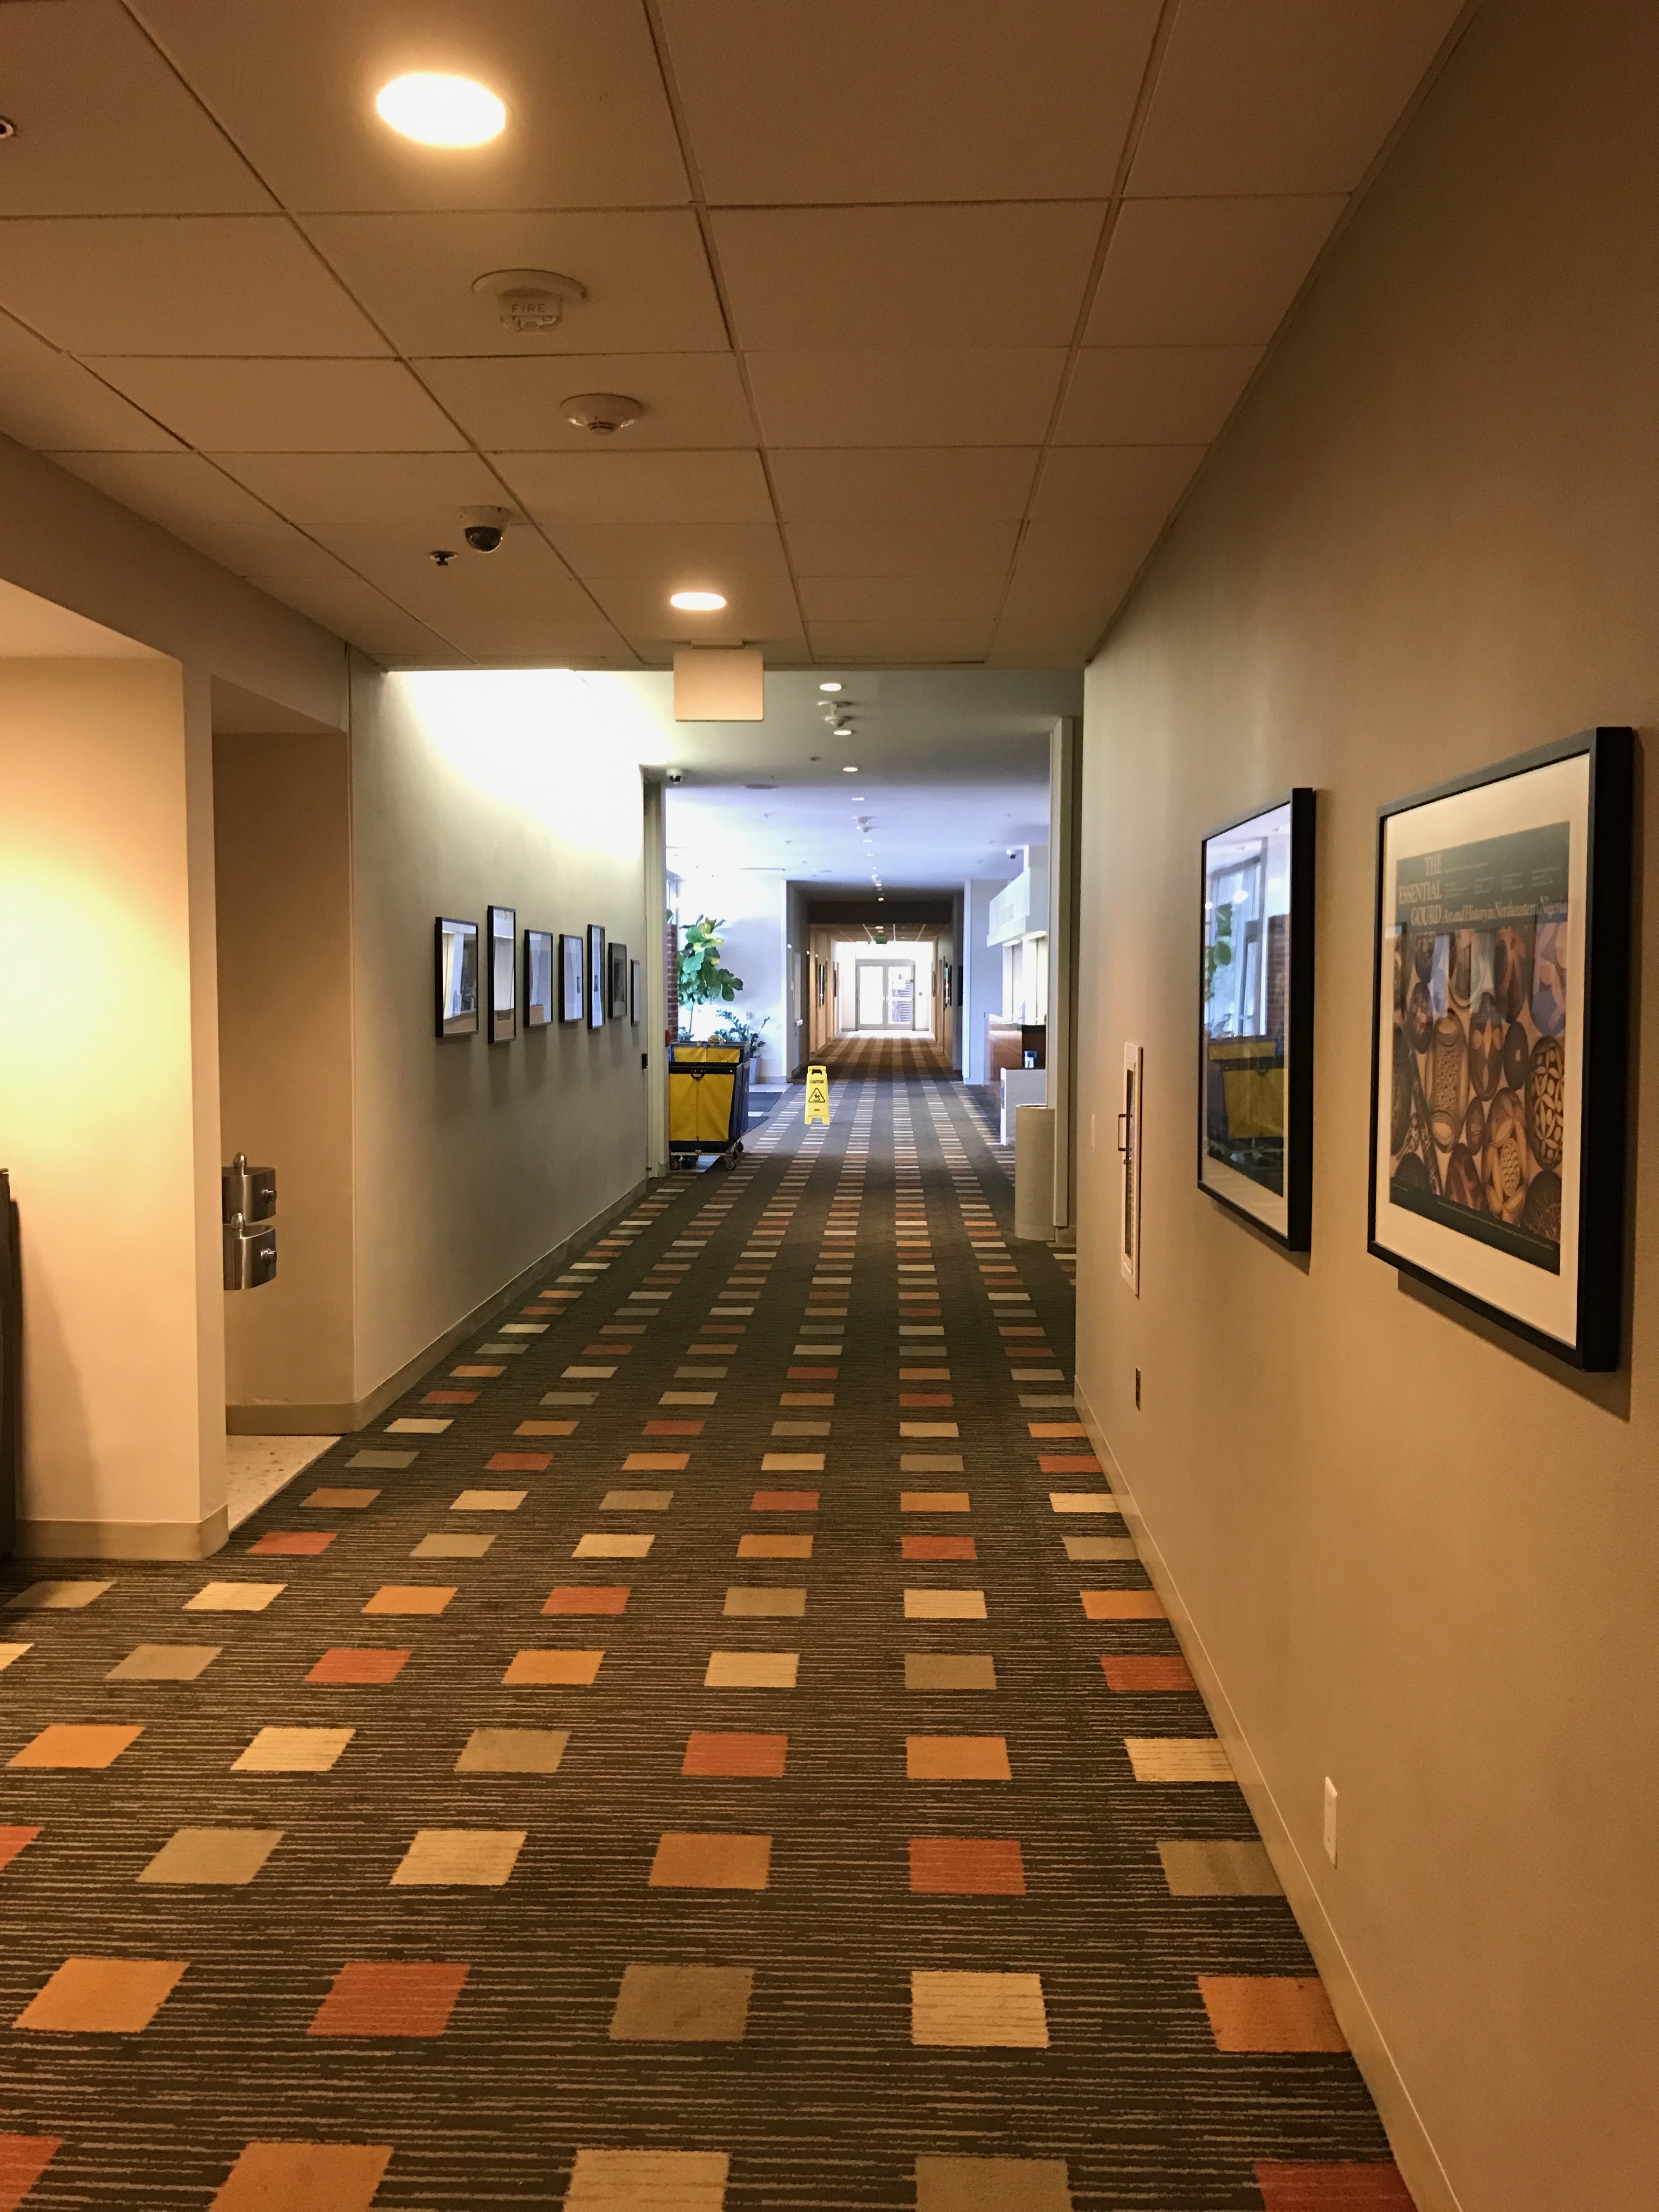 Lobby Area of Dormitory Showcasing Painted Walls with Picture Frames Hanging from them.